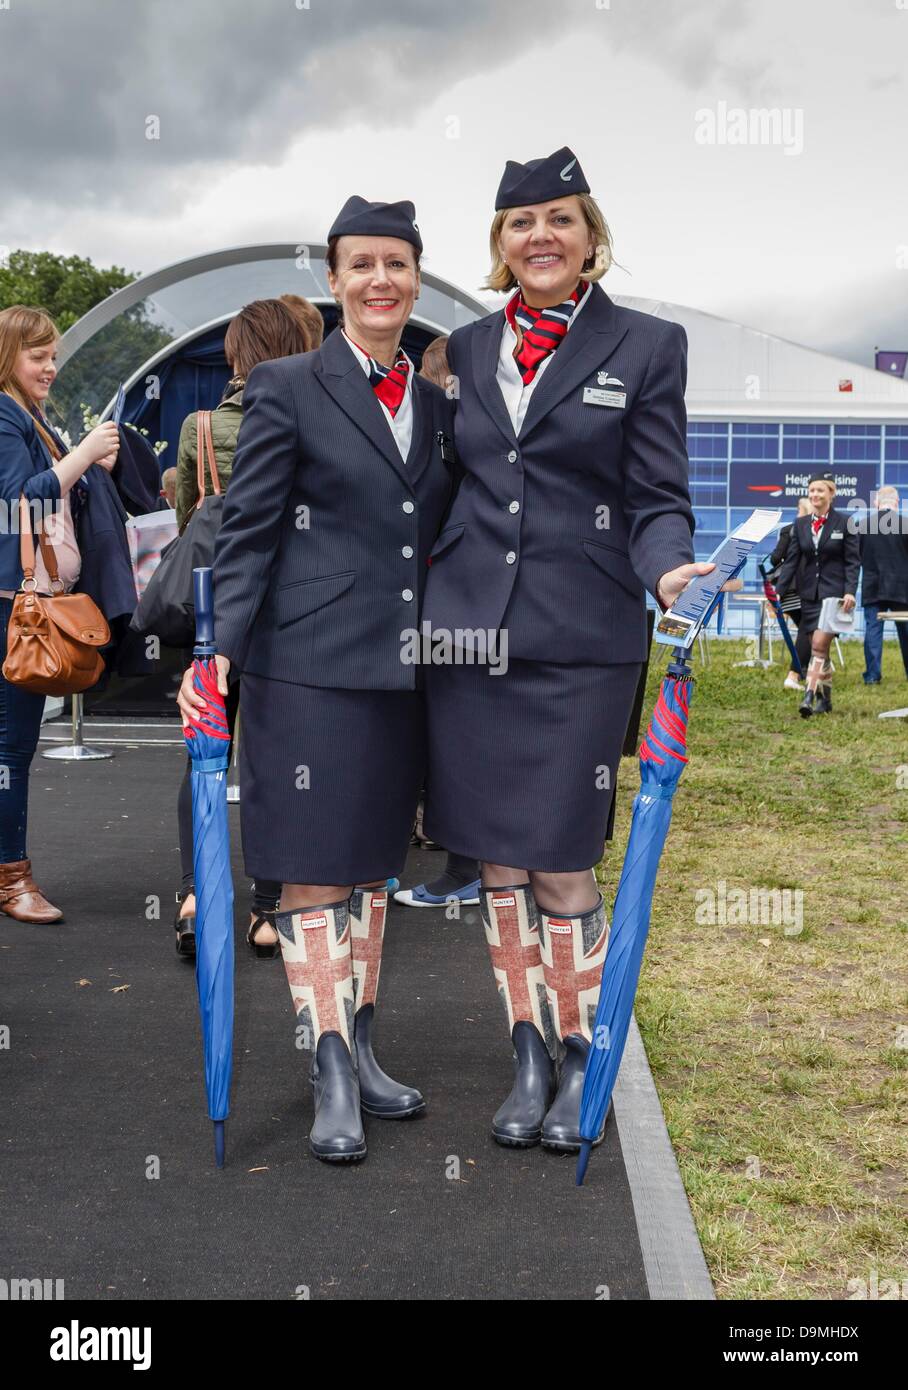 London, UK. 22nd June 2013.  Taste of London 2013, British Airways stewardesses in Union Jack wellies attend the BA Height Cuisine showcase. The event is sponsored by British Airways and takes place every year in Regents Park, where 40 of the city's top restaurants serve their finest dishes for visitors to sample. London, UK. 22nd June 2013. Photo: Paul Maguire/Alamy Live News Stock Photo